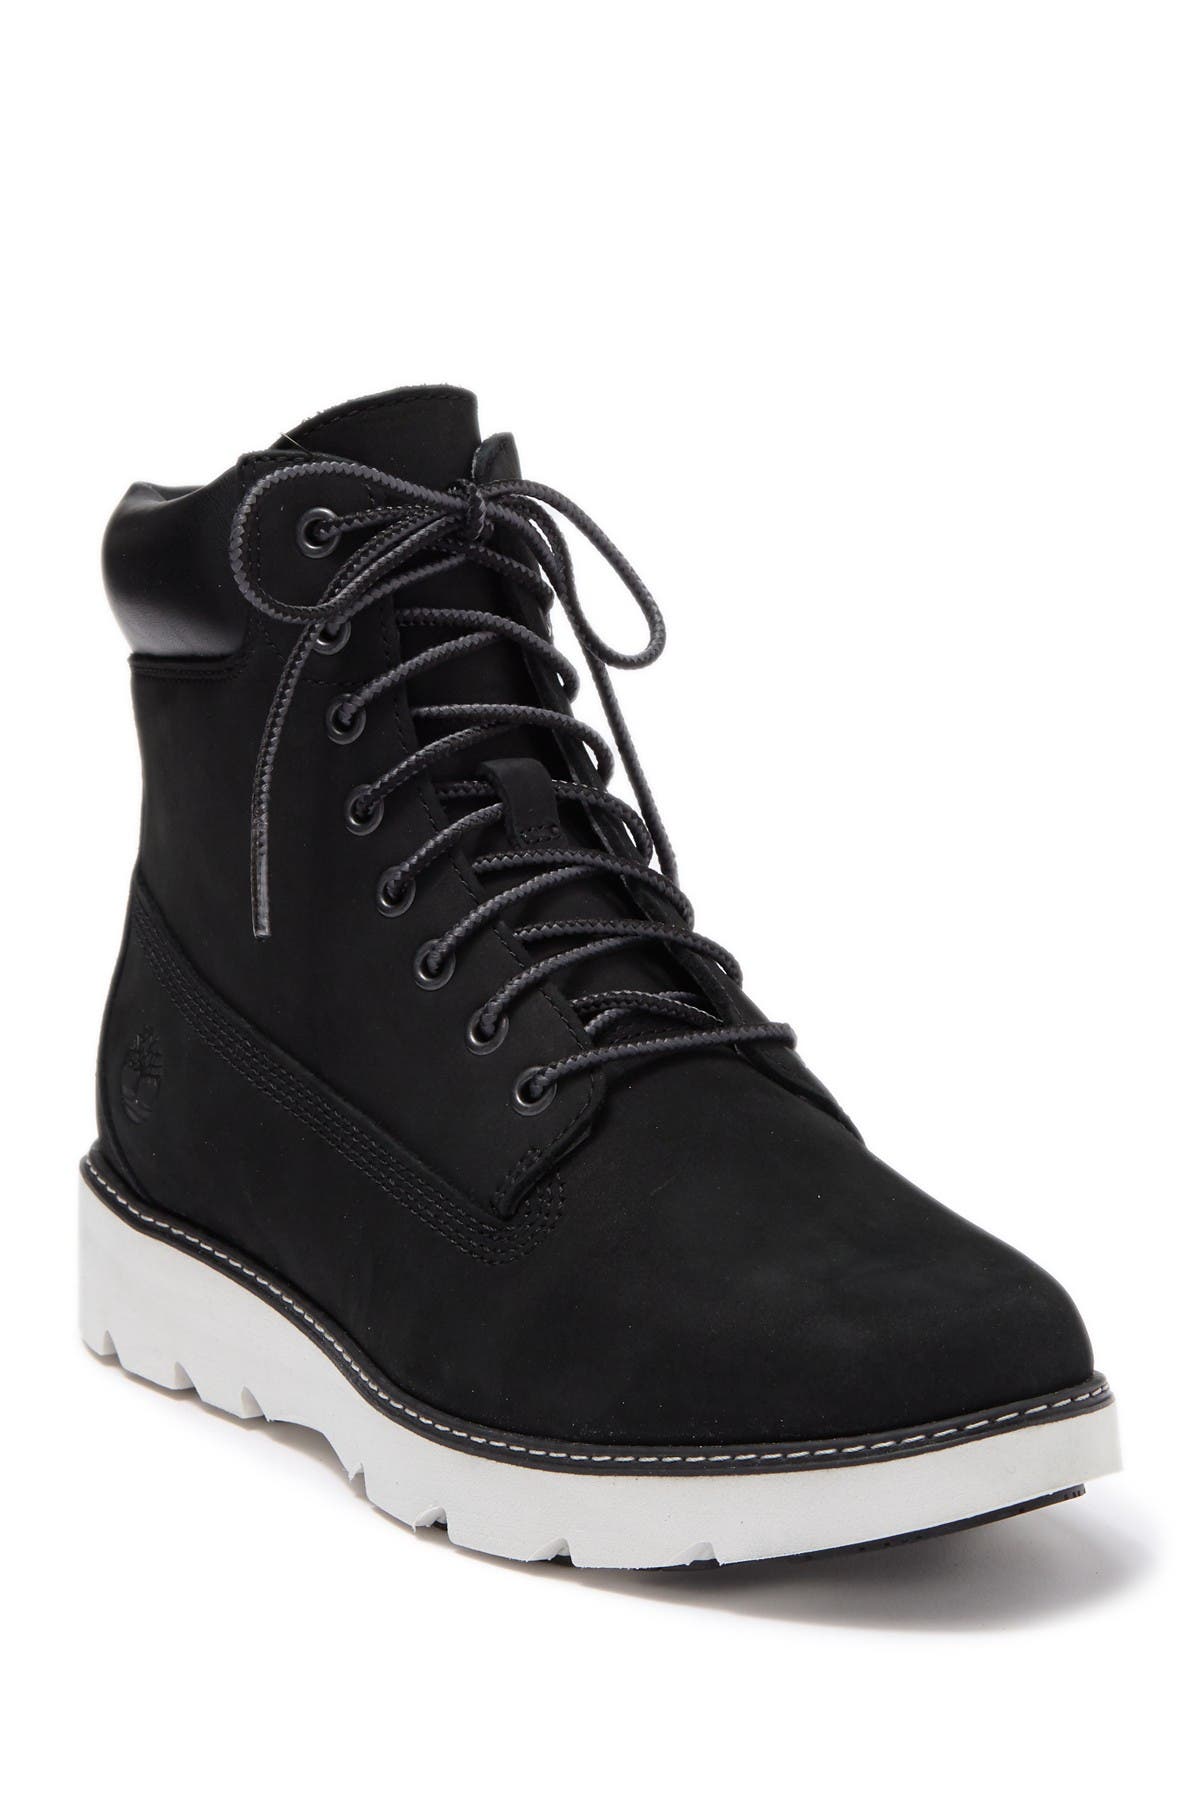 Timberland | Keeley Field Boot 